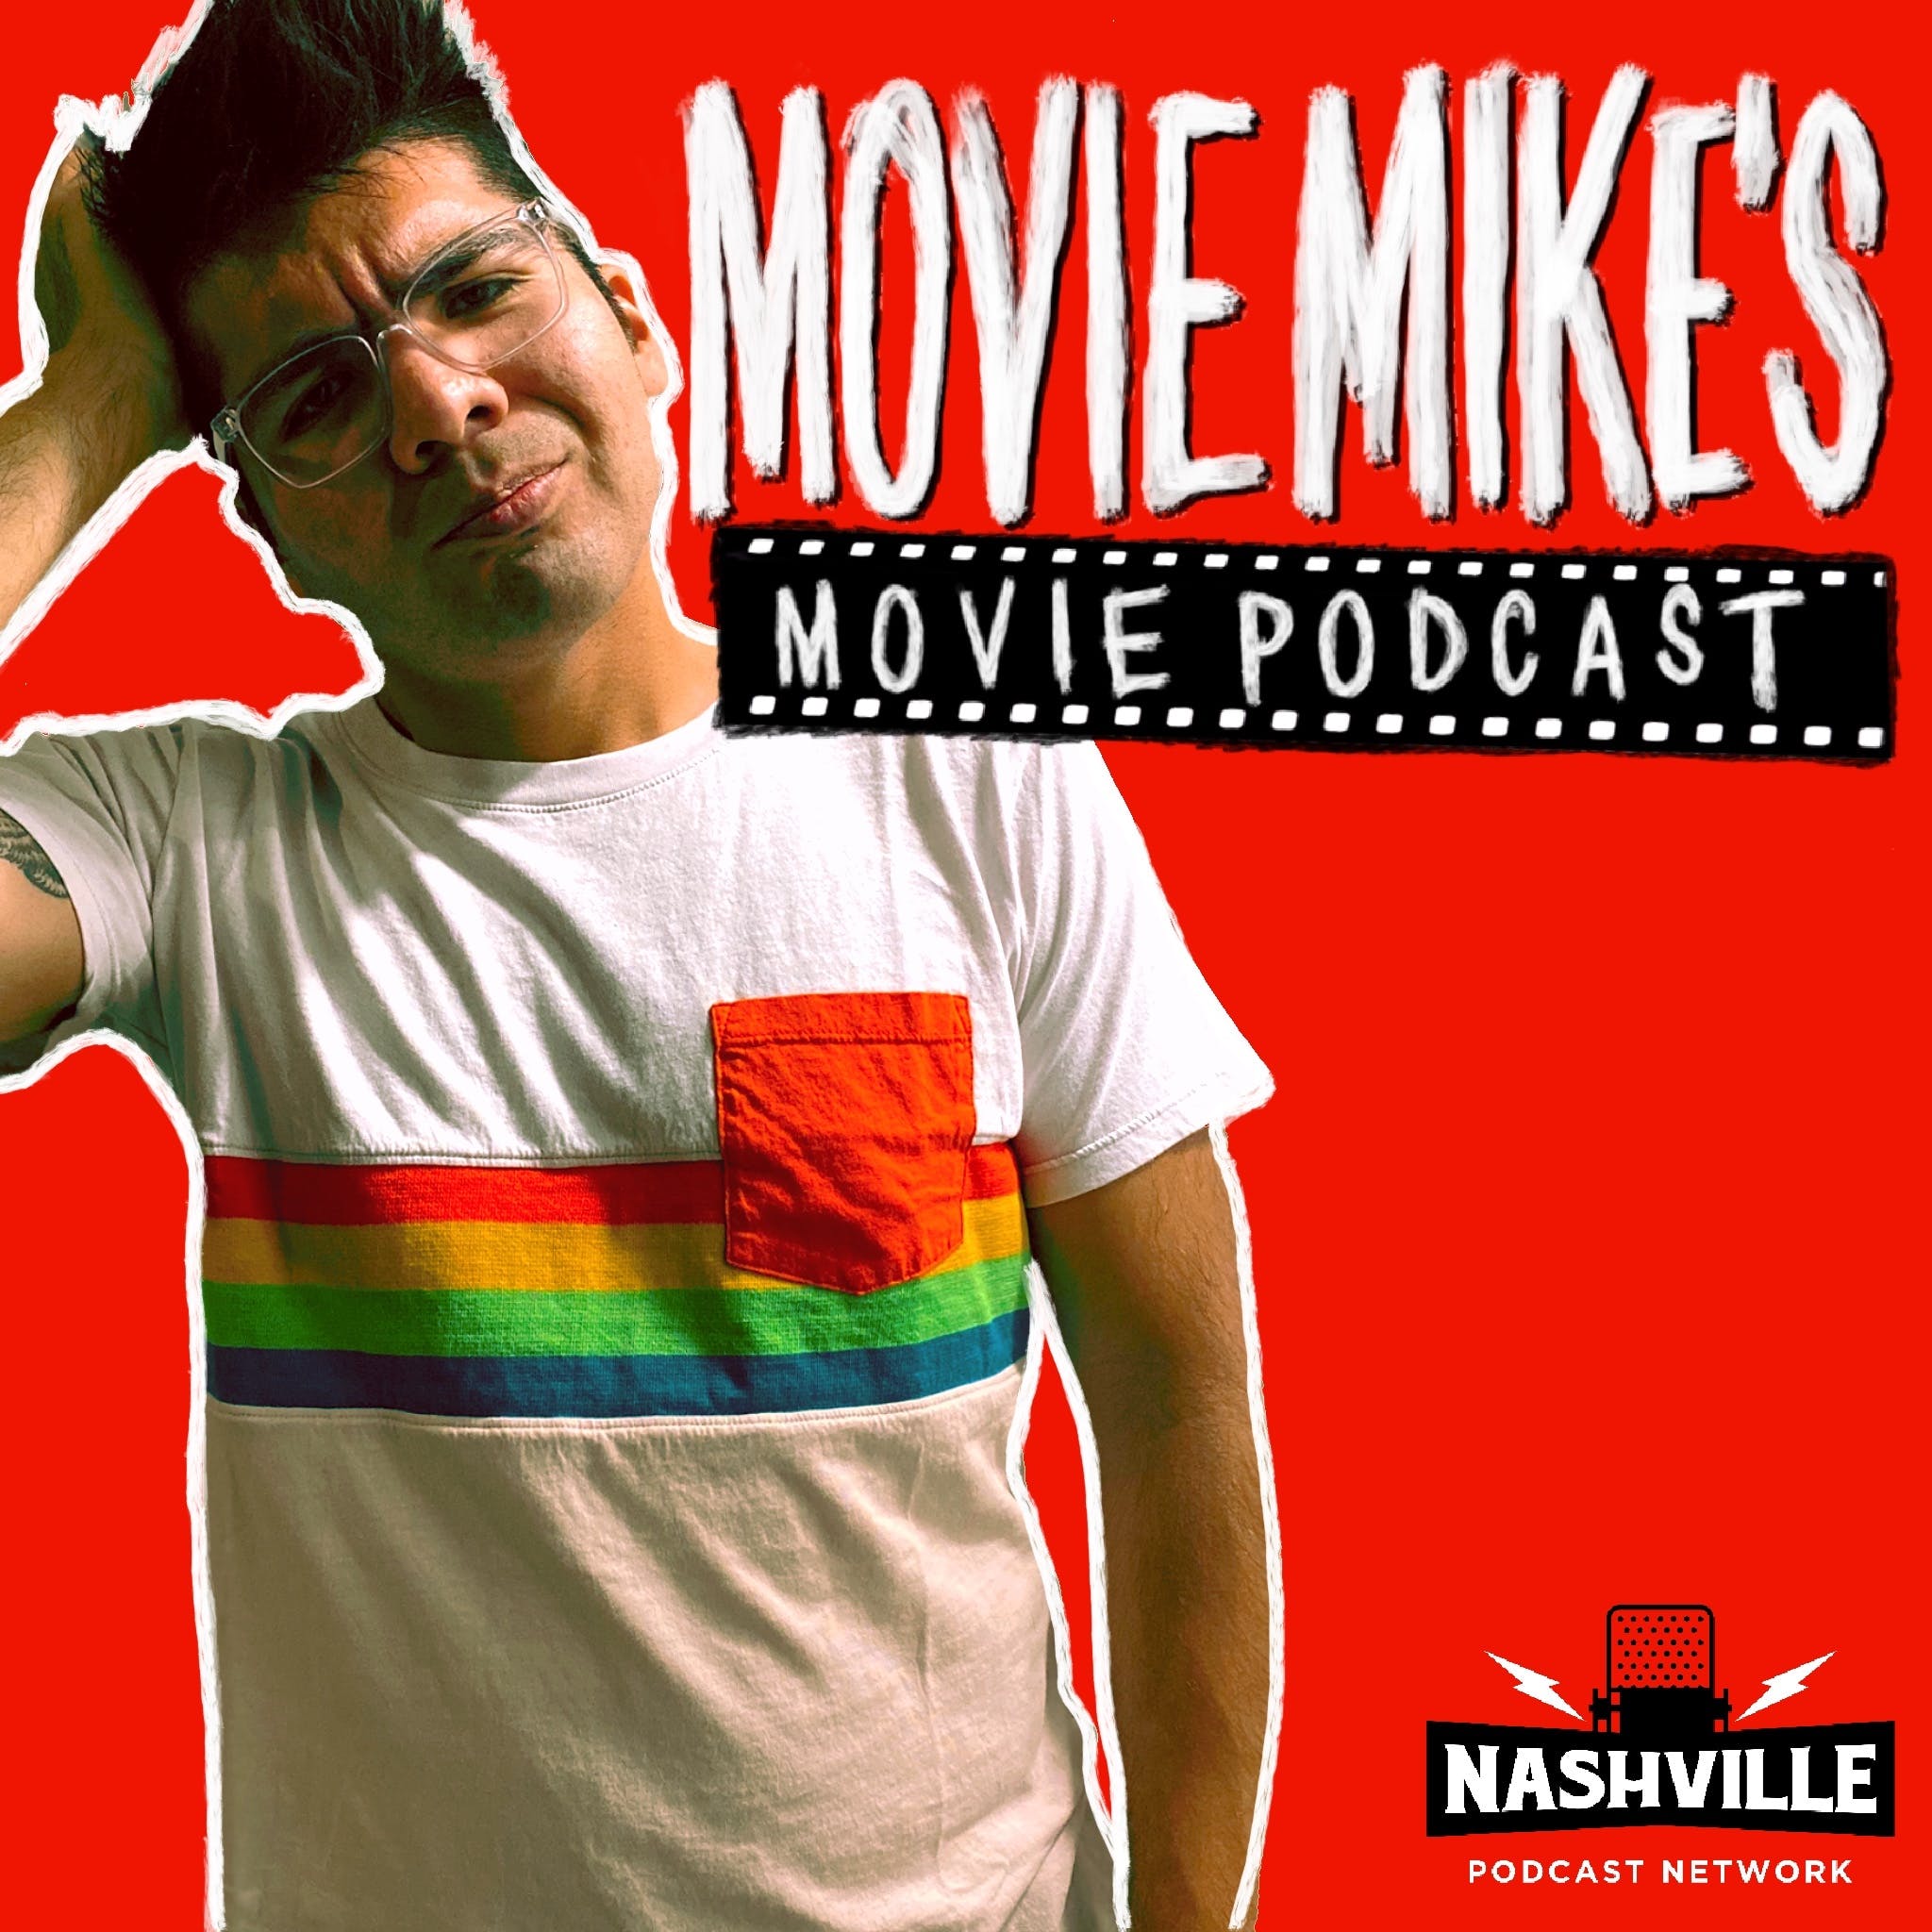 Introducing Movie Mike's Movie Podcast